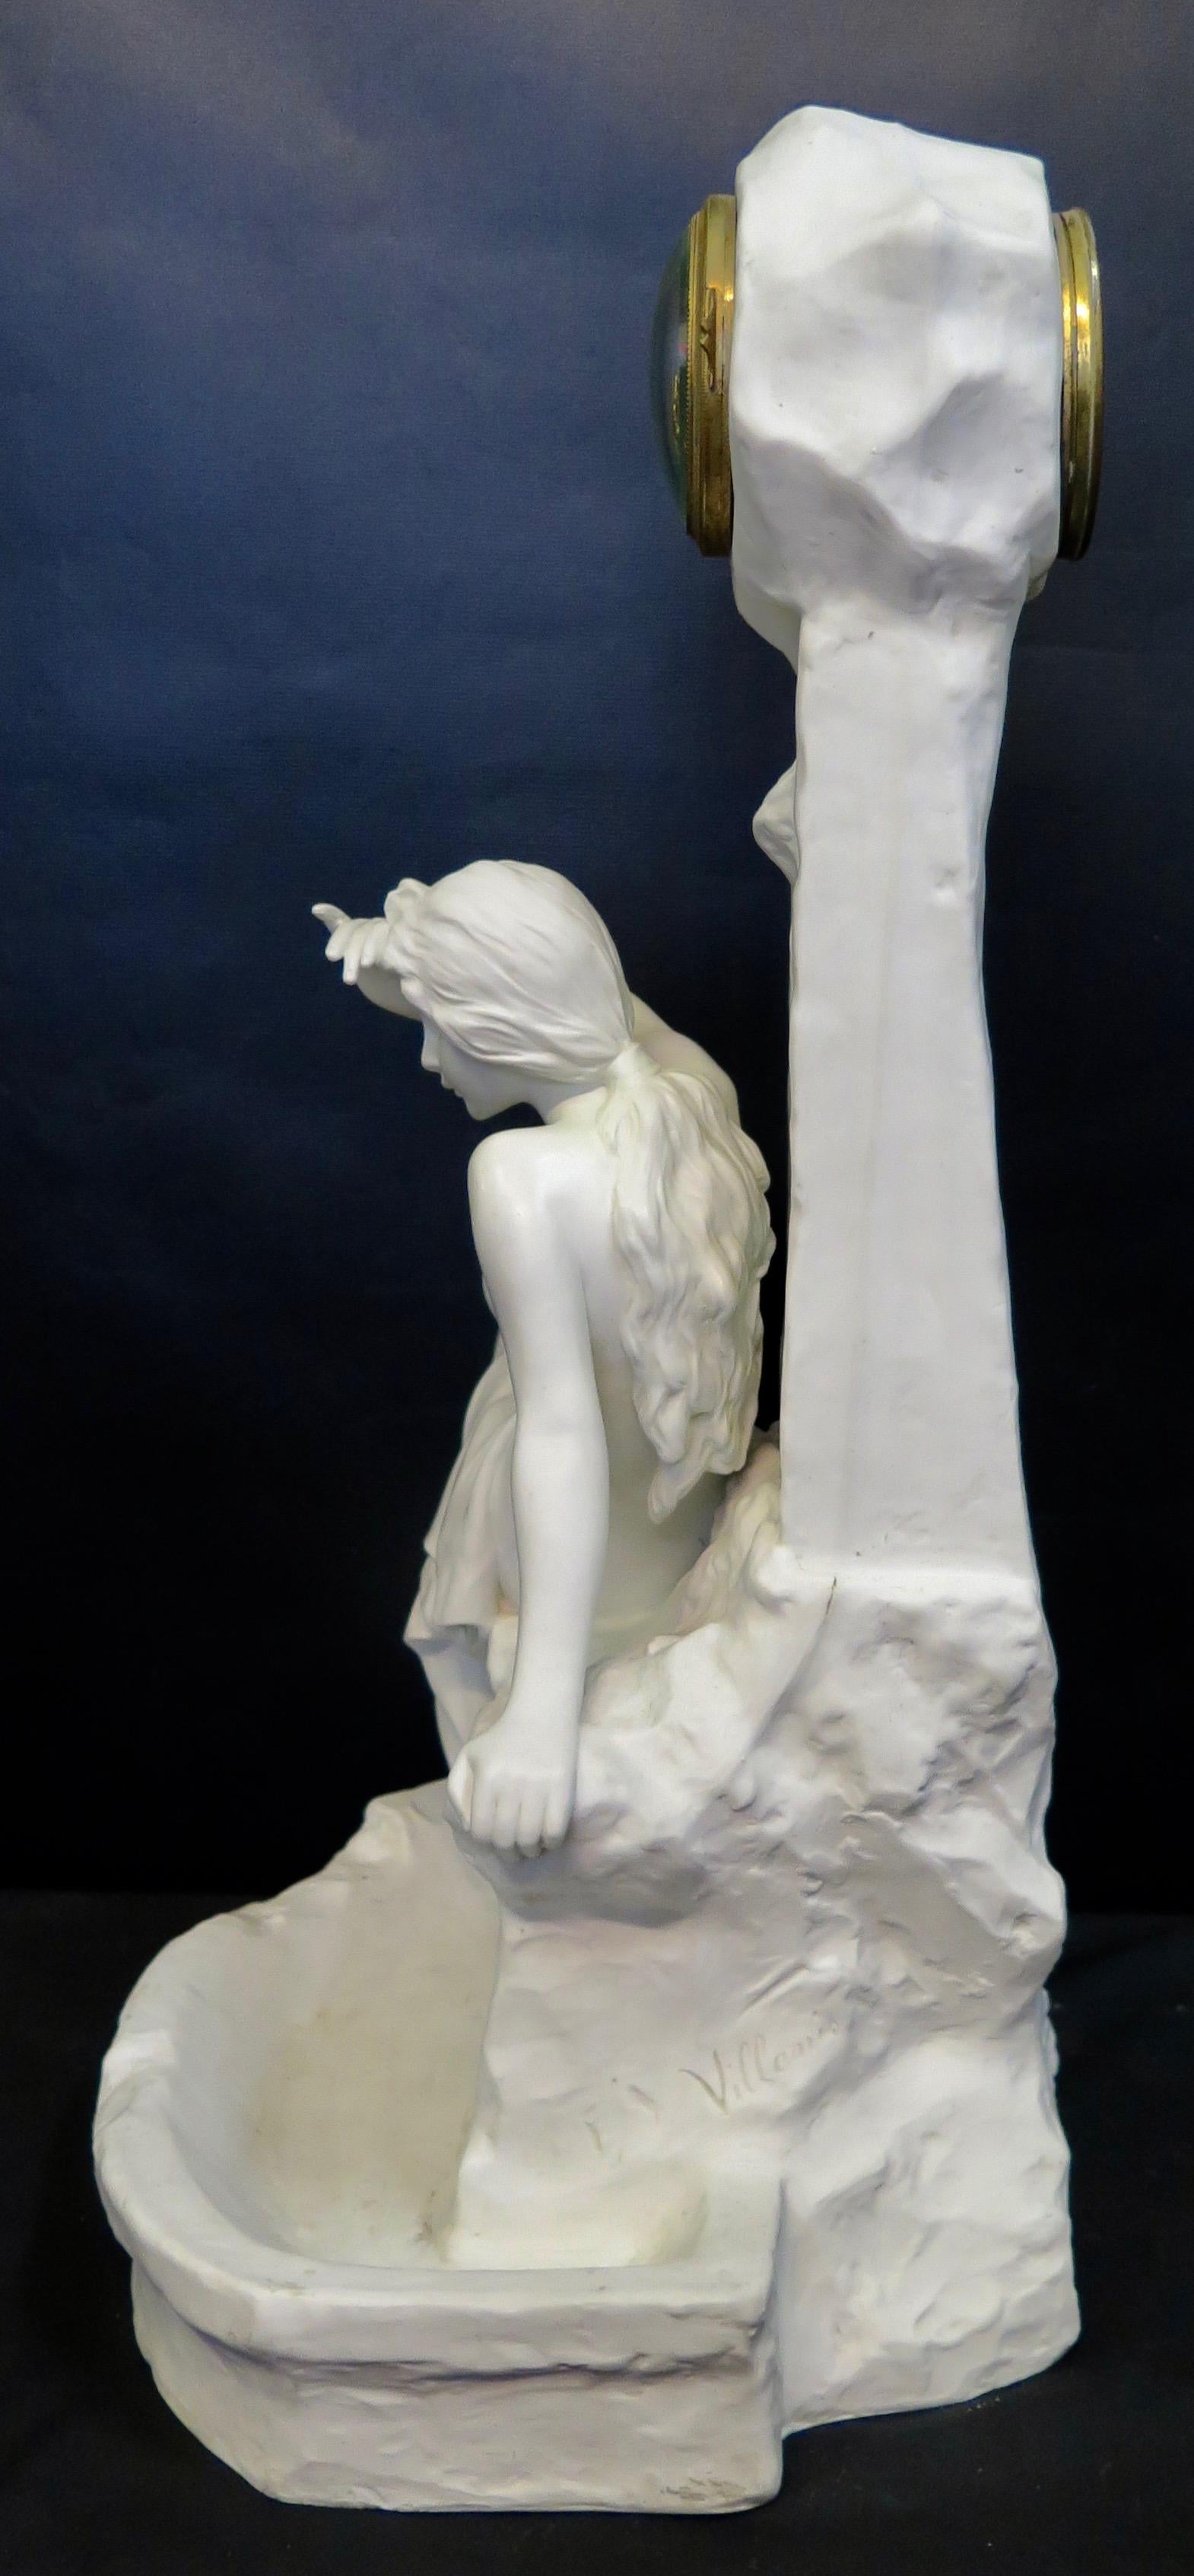 This vintage Art Nouveau sculpture with clock is designed in a hard paste white porcelain. A sensuous young scantily dressed female figure is positioned upon the ledge of the town well. A pensive face sets a somber mood. A clock is placed within the